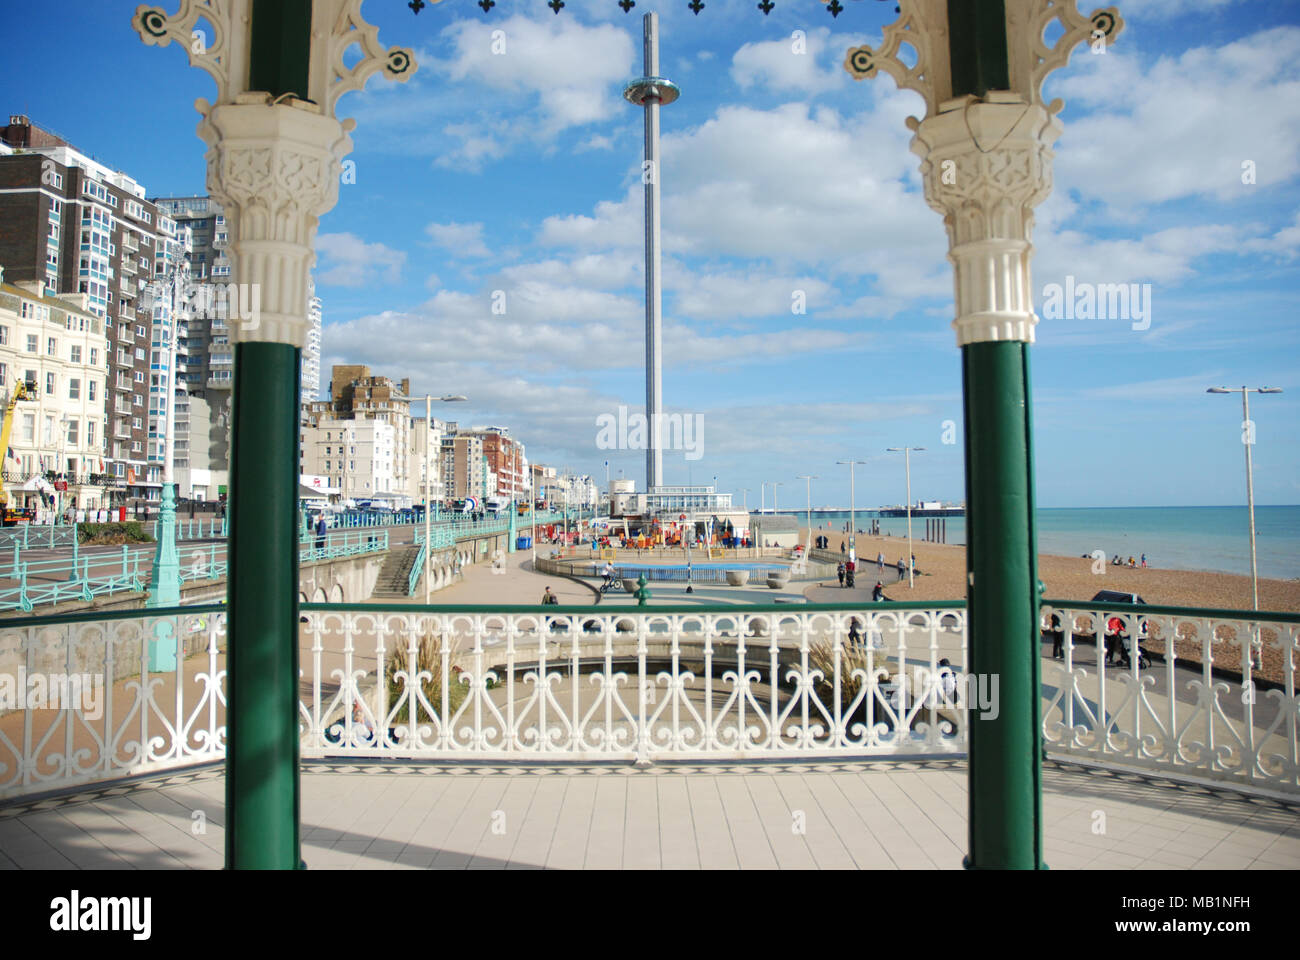 A picture of the I360 from the Brighton Bandstand showing Modern and Victorian Architecture Stock Photo